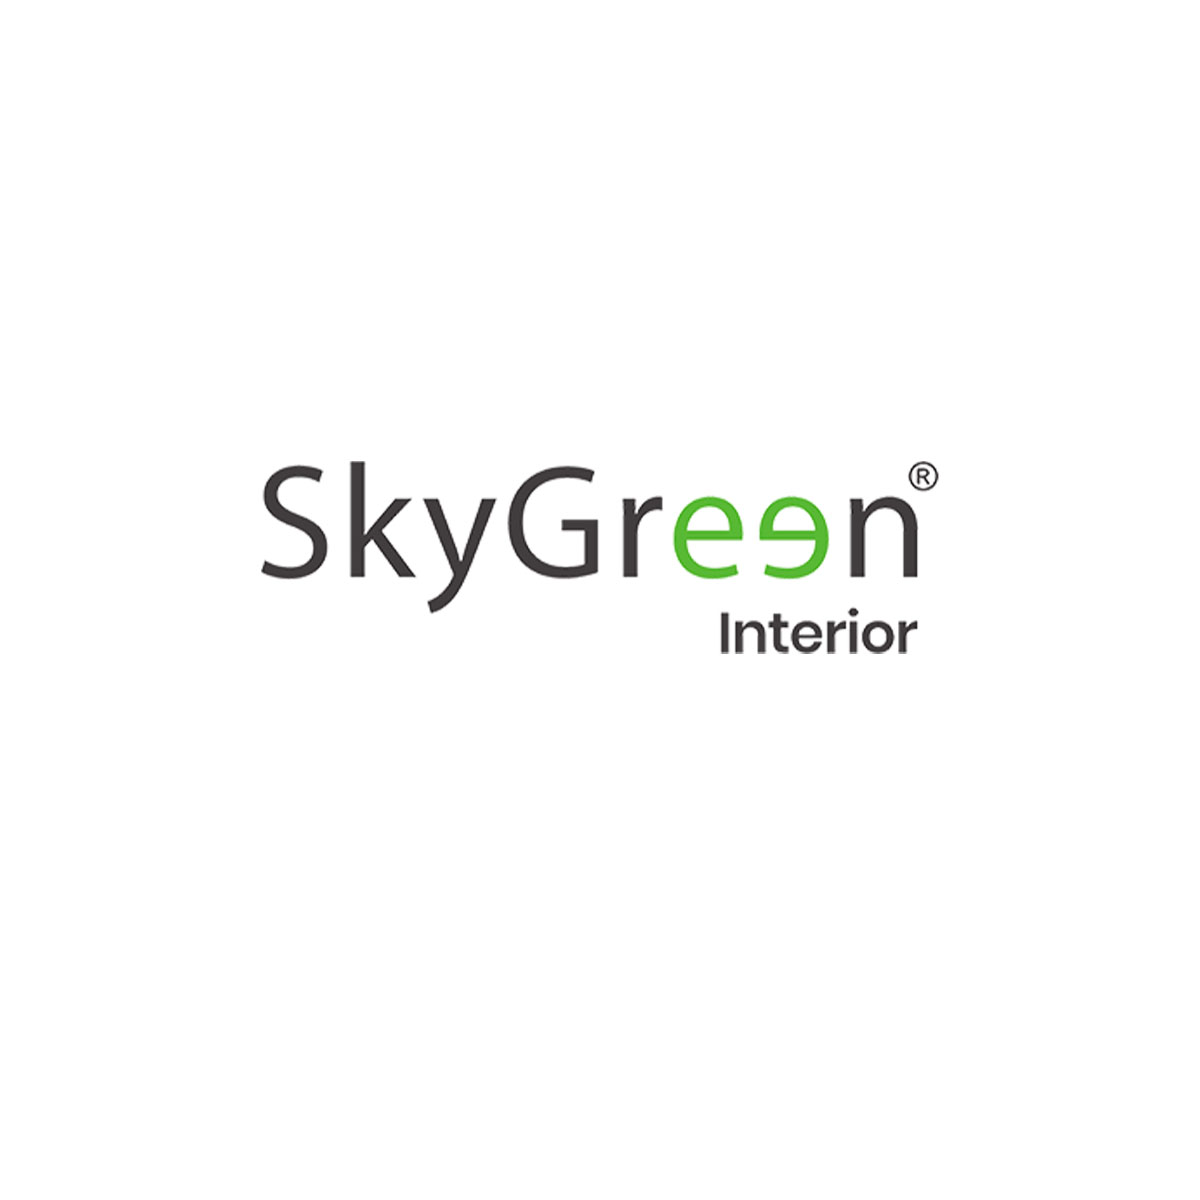 Skygreen Interior|Architect|Professional Services